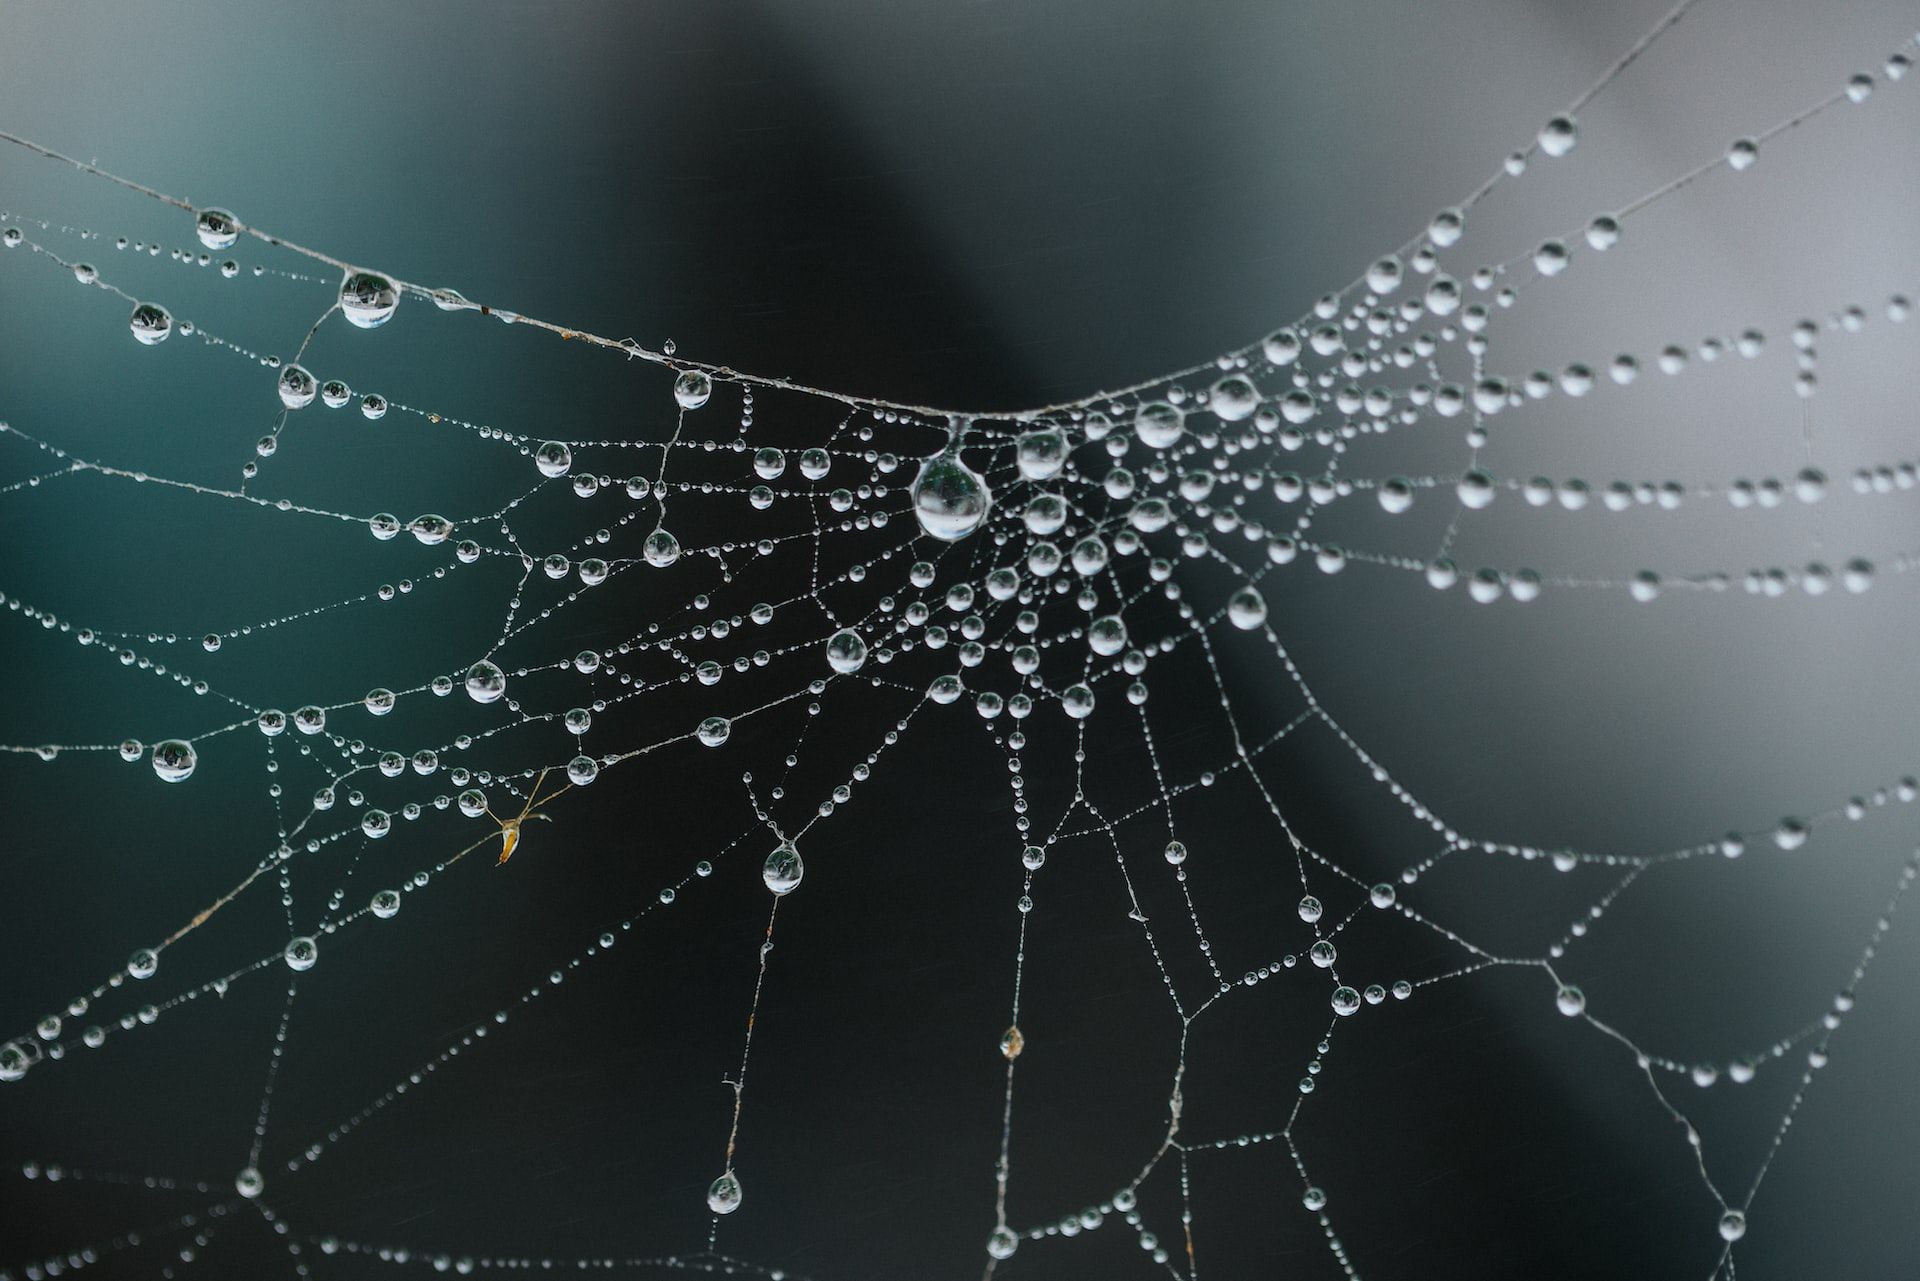 Image of a spiderweb with raindrops